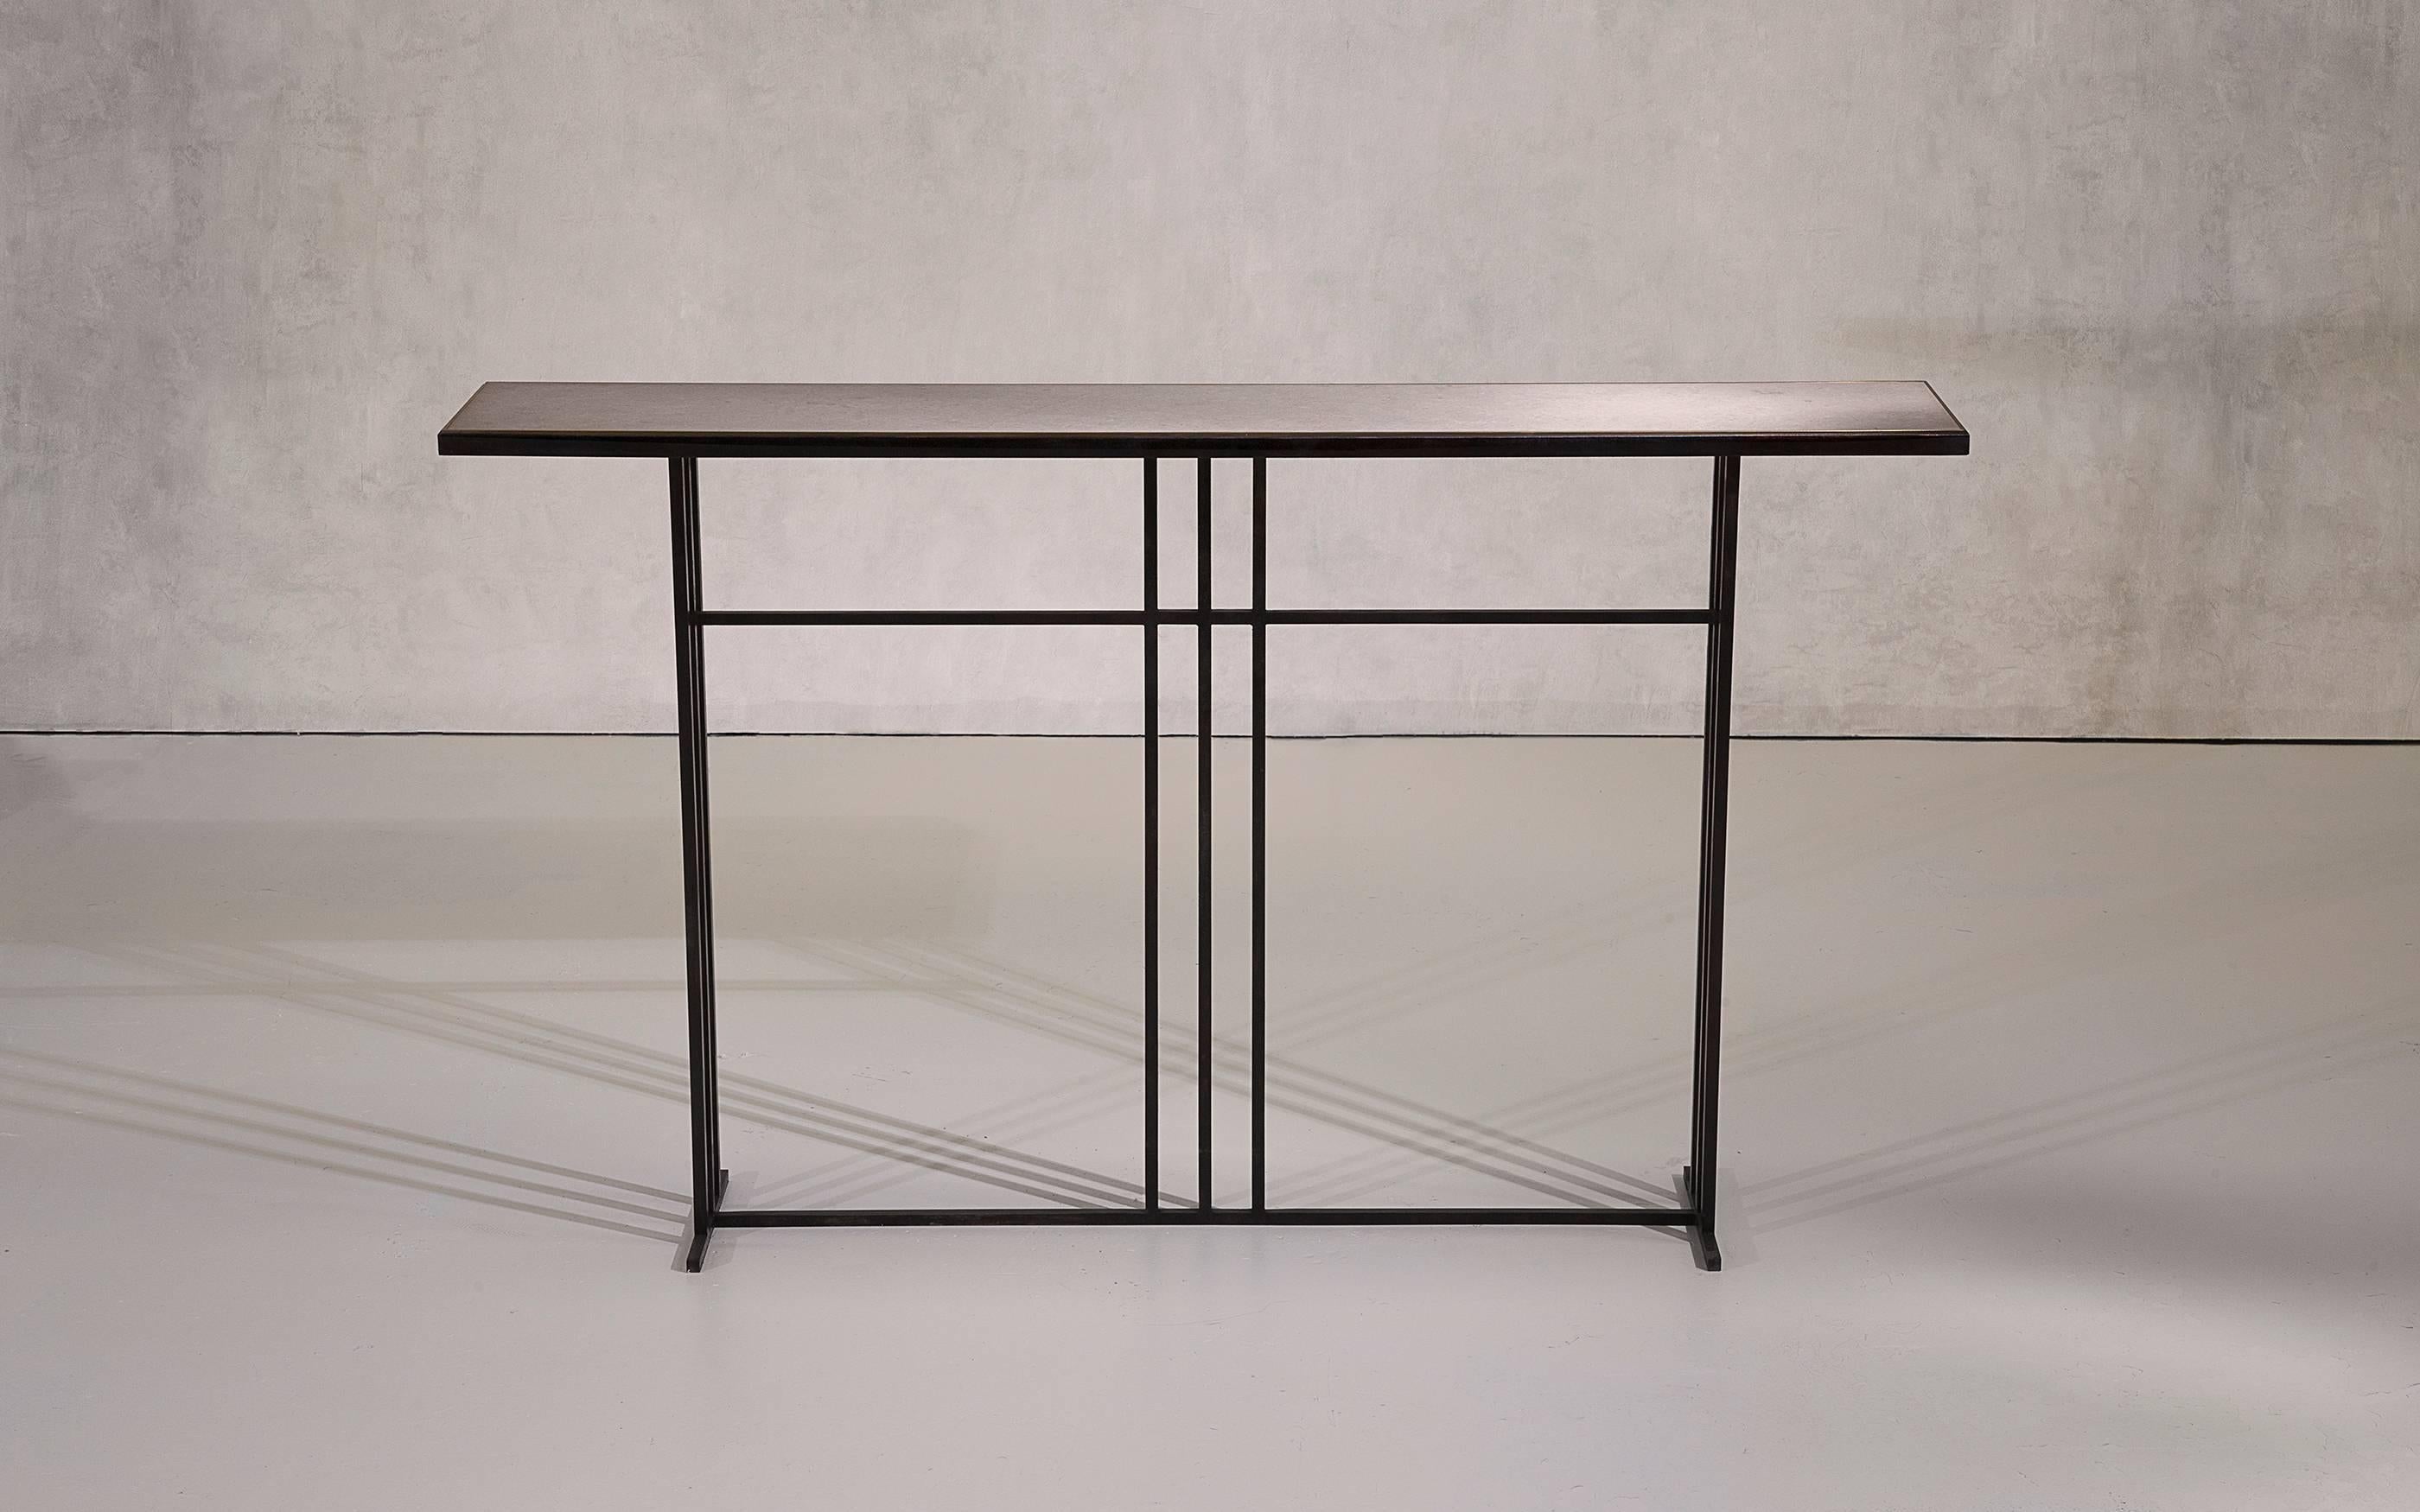 A console table in blackened steel and honed Cumbrian slate, with a polished brass trim. Hand crafted in the North to order. Custom sizes and finishes are available.

Measures: 150 W x 30 D x 80cm H. 
Custom sizes available.

Made to order in